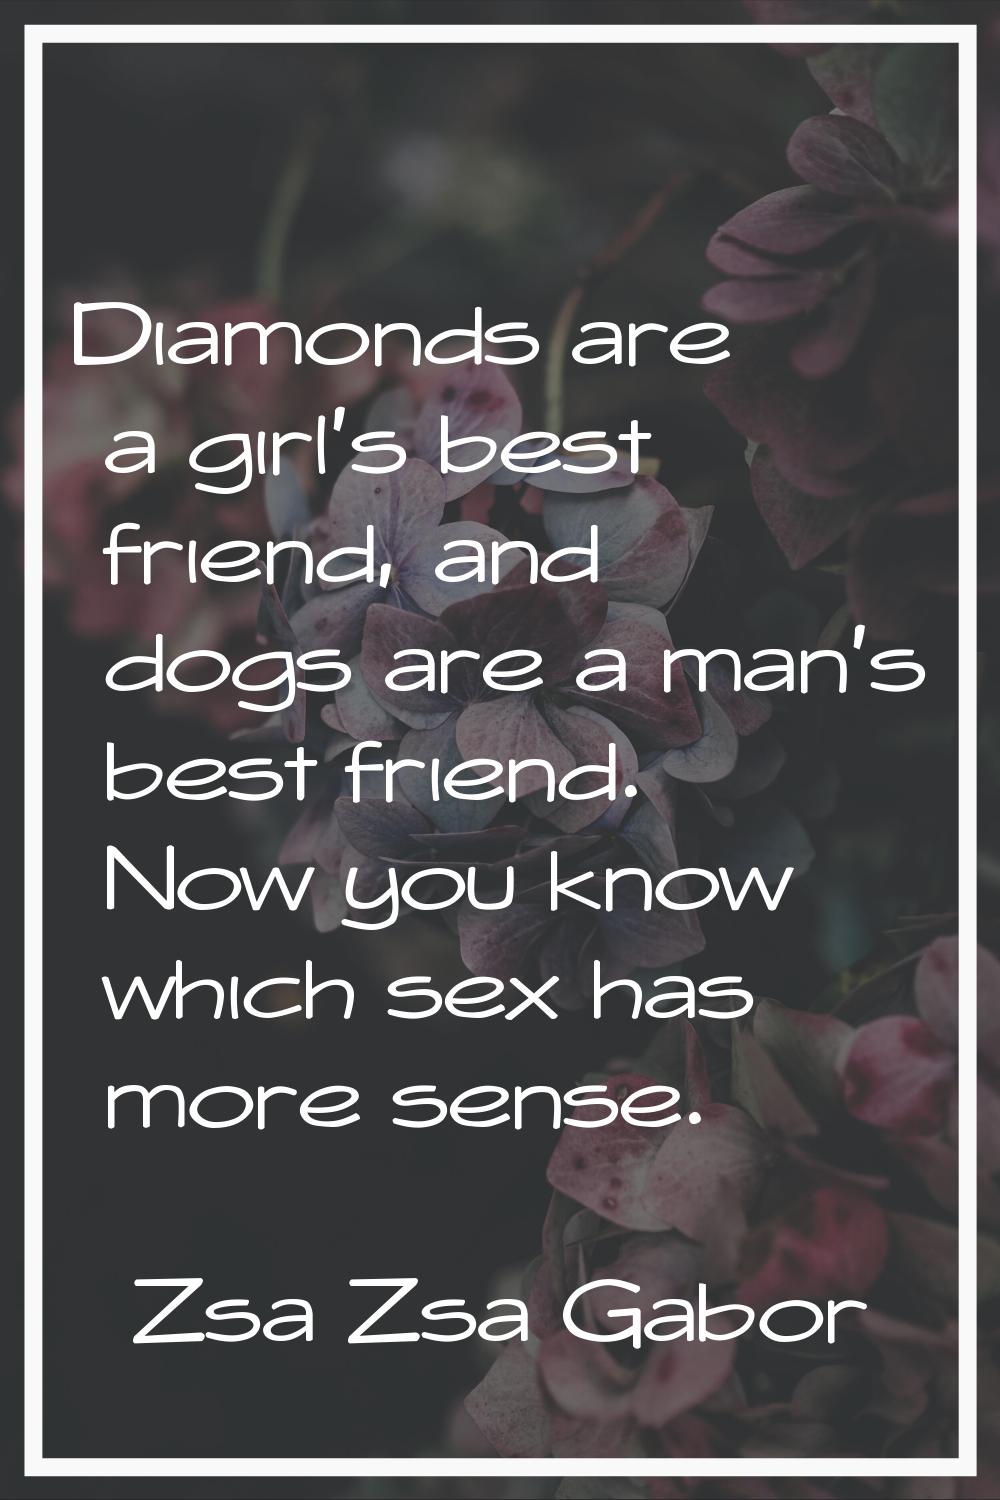 Diamonds are a girl's best friend, and dogs are a man's best friend. Now you know which sex has mor